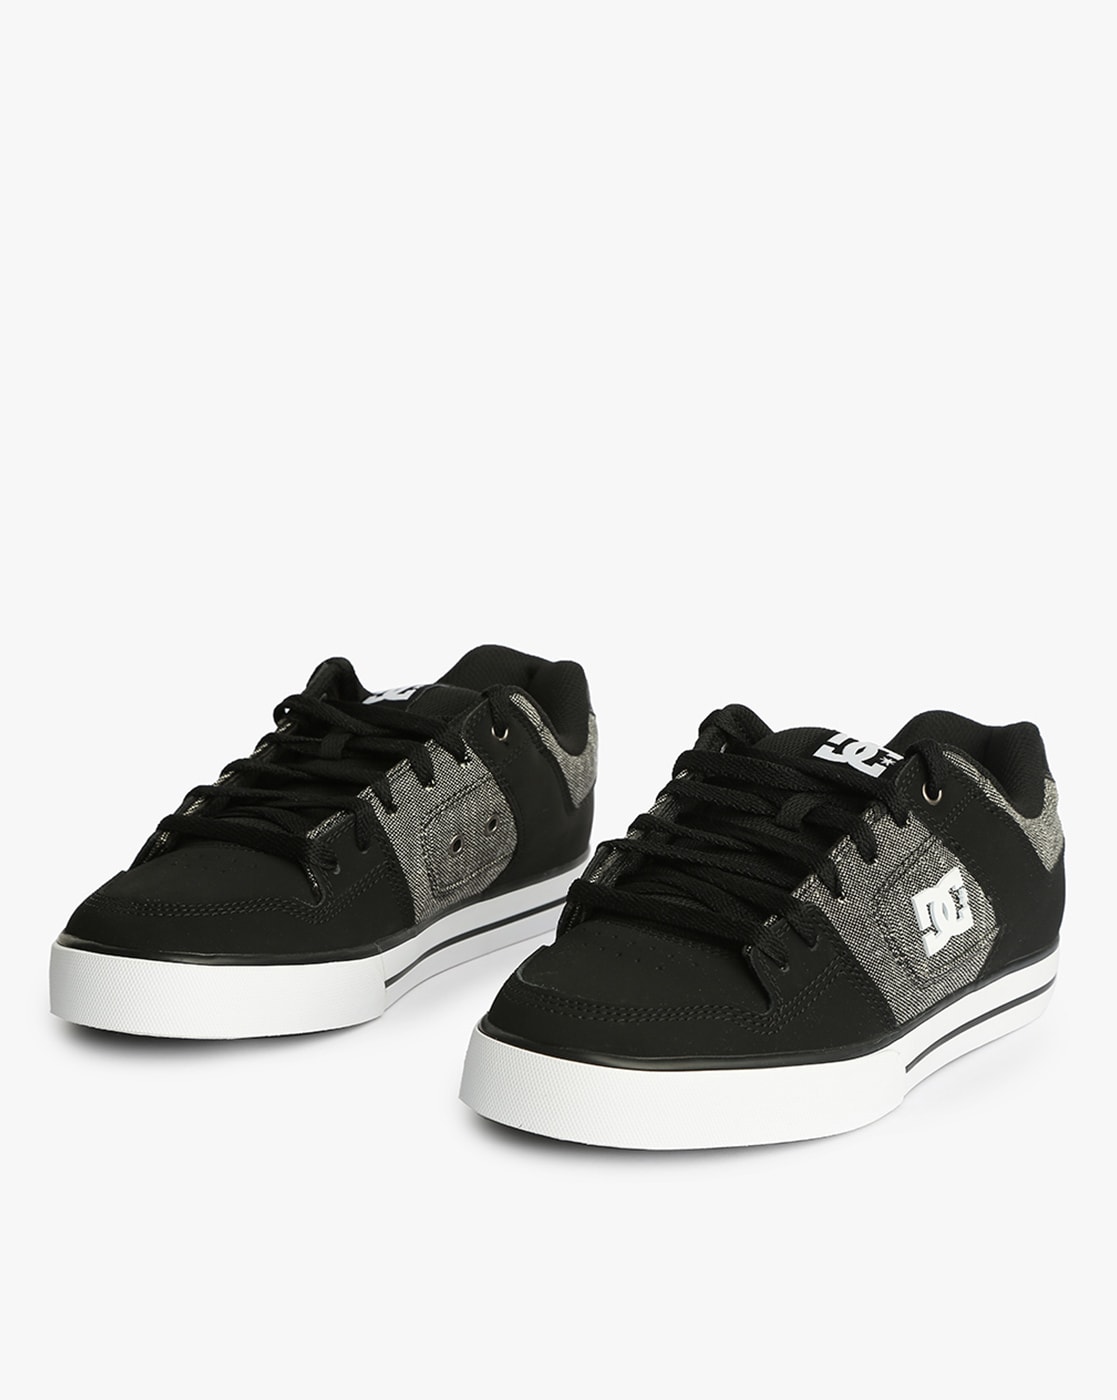 black and grey dc shoes